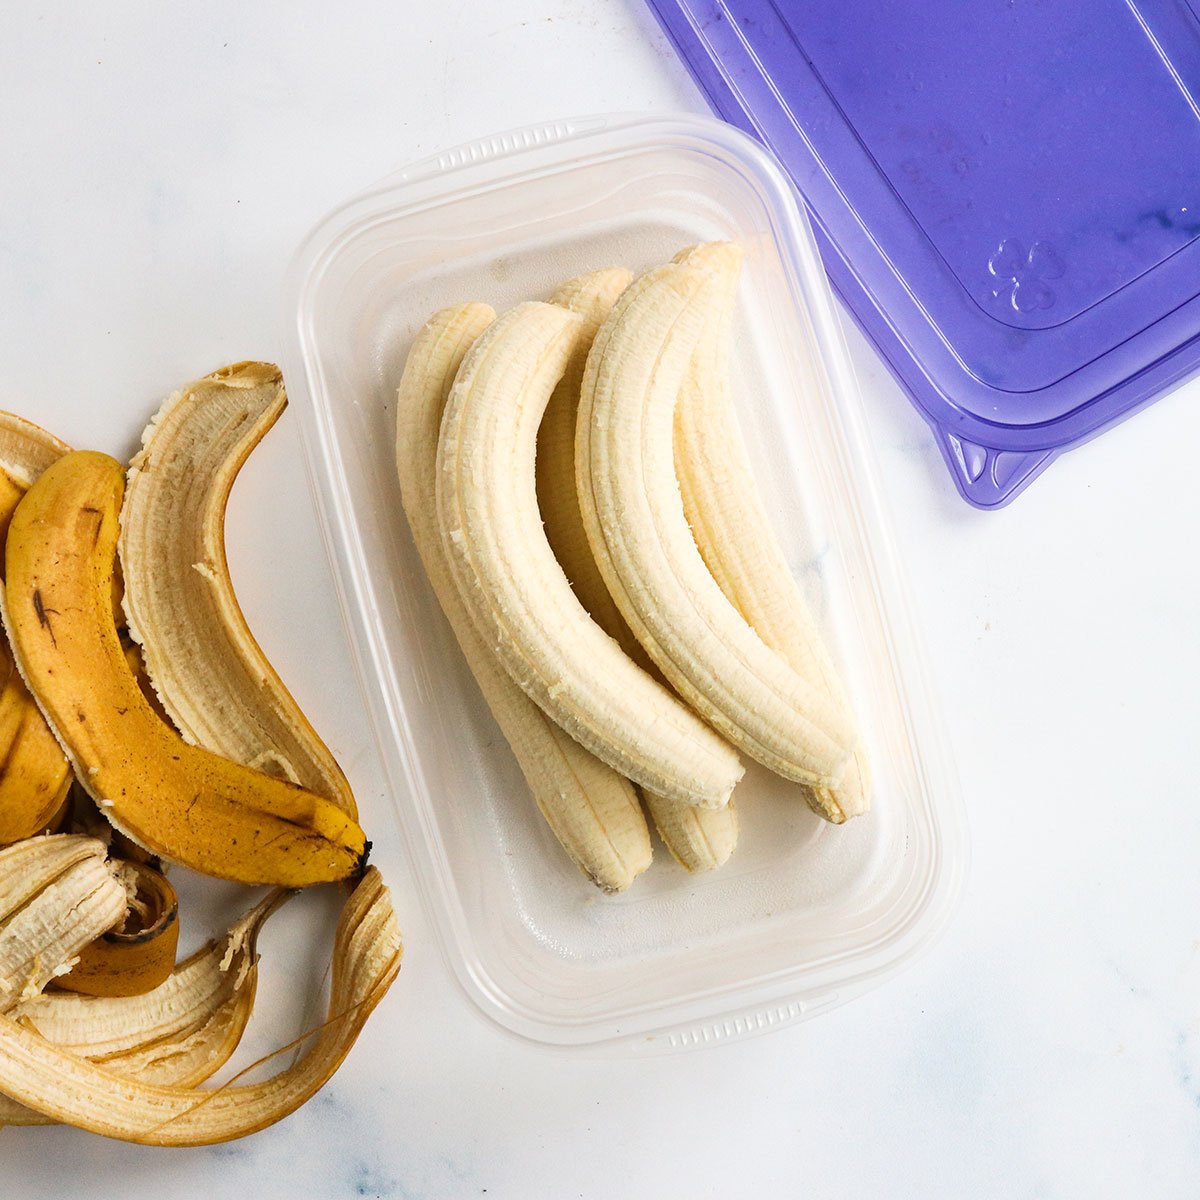 Frozen bananas stored whole in a plastic container.